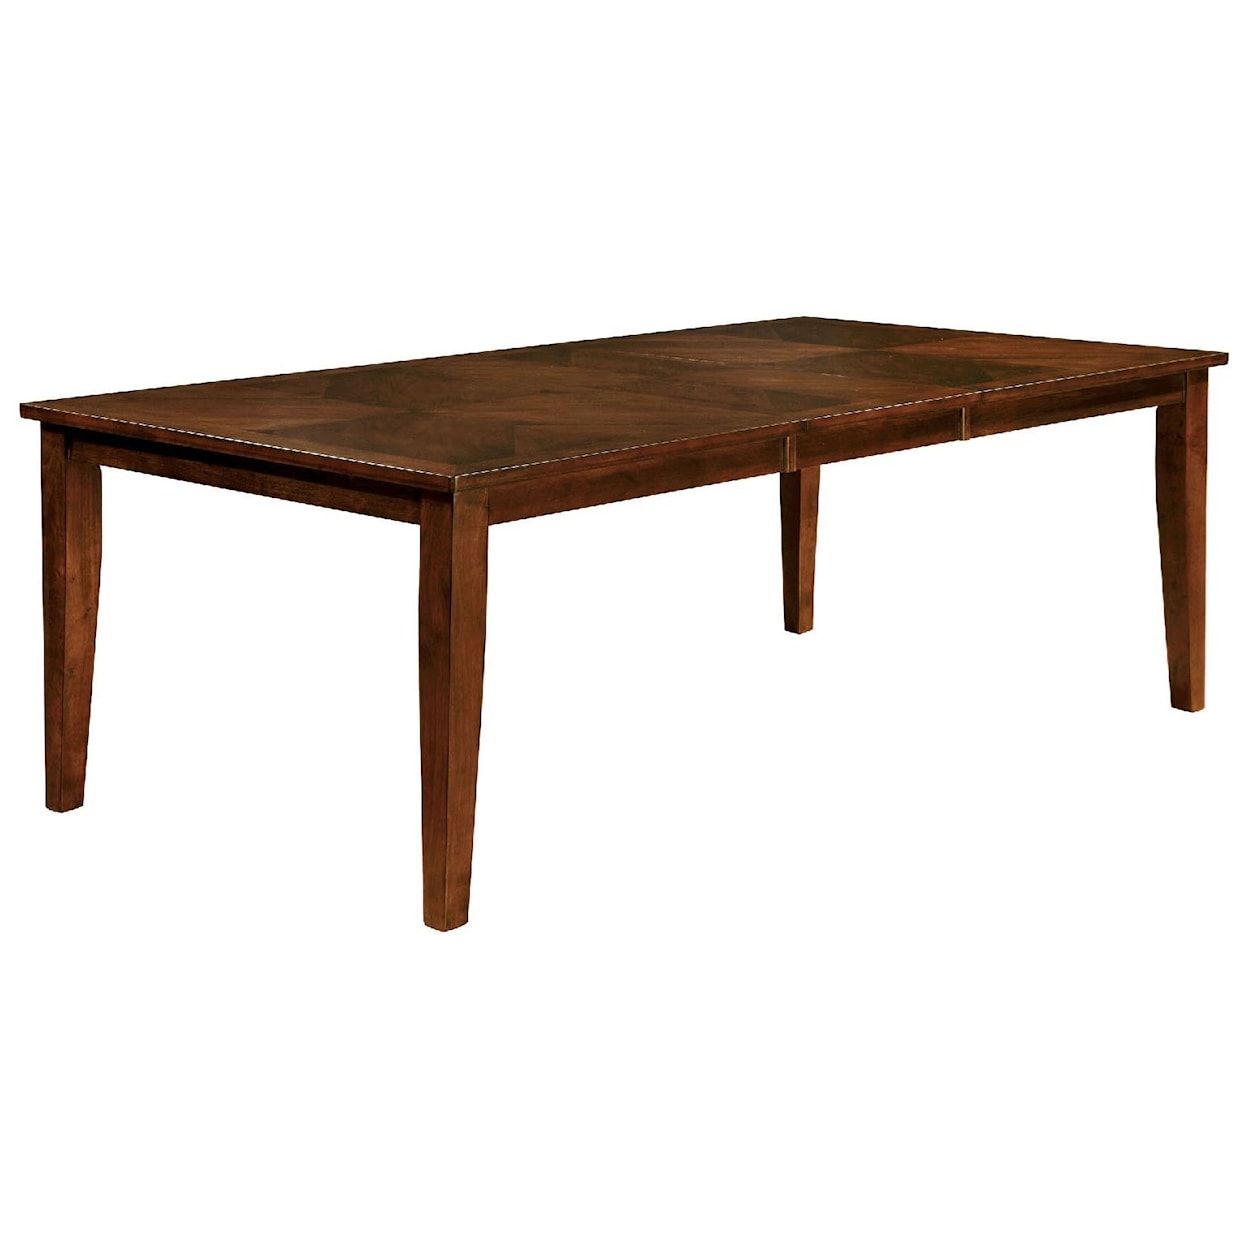 Furniture of America Hillsview Dining Table